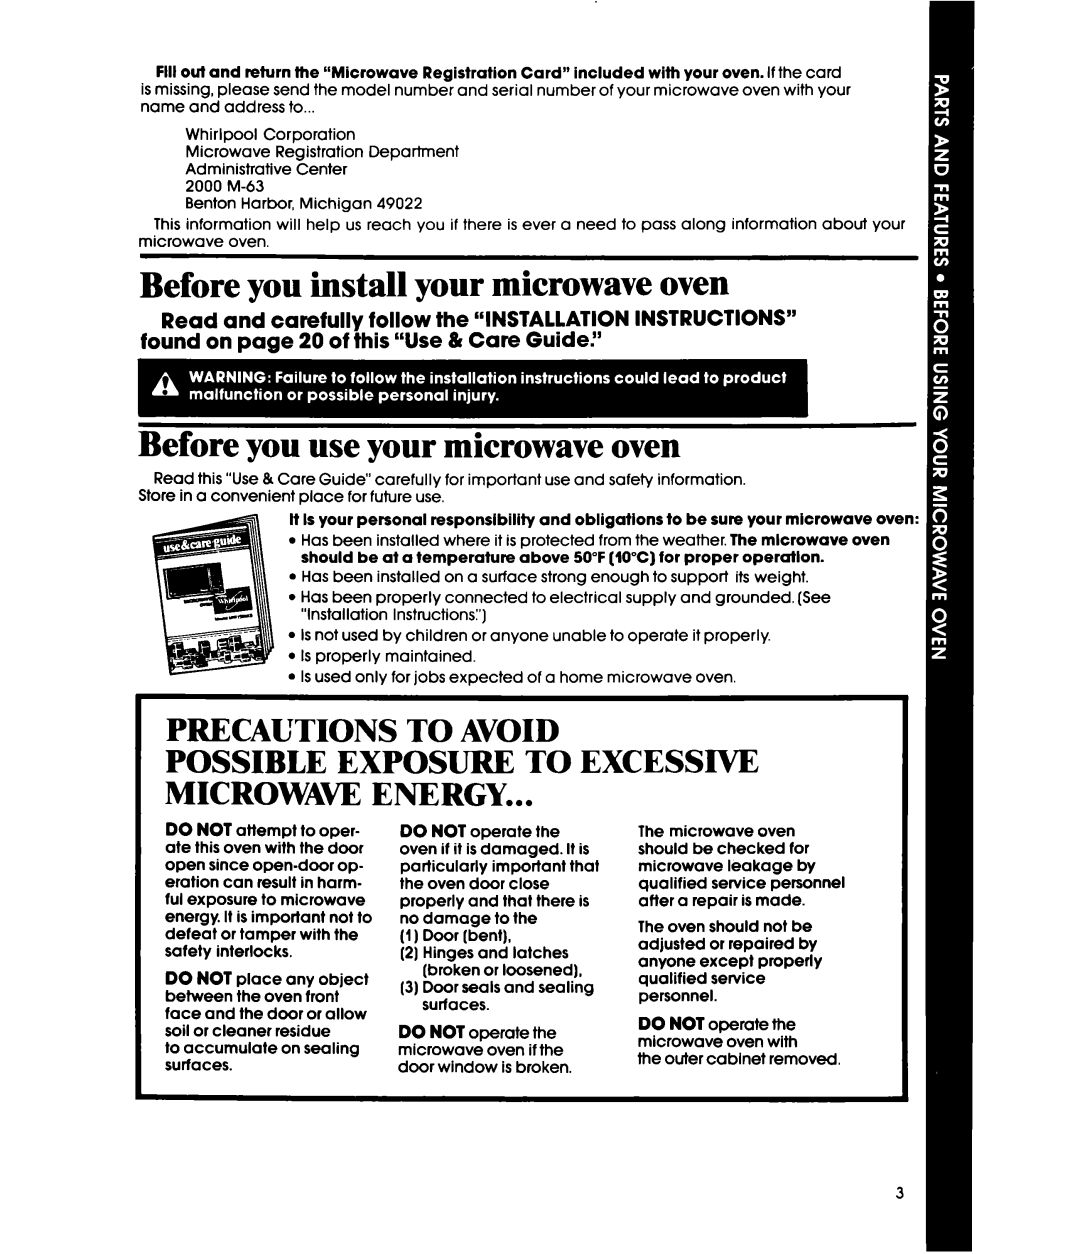 Whirlpool MWl501XS manual Before you install your microwave oven, Before you use your microwave oven, Precautions To Avoid 